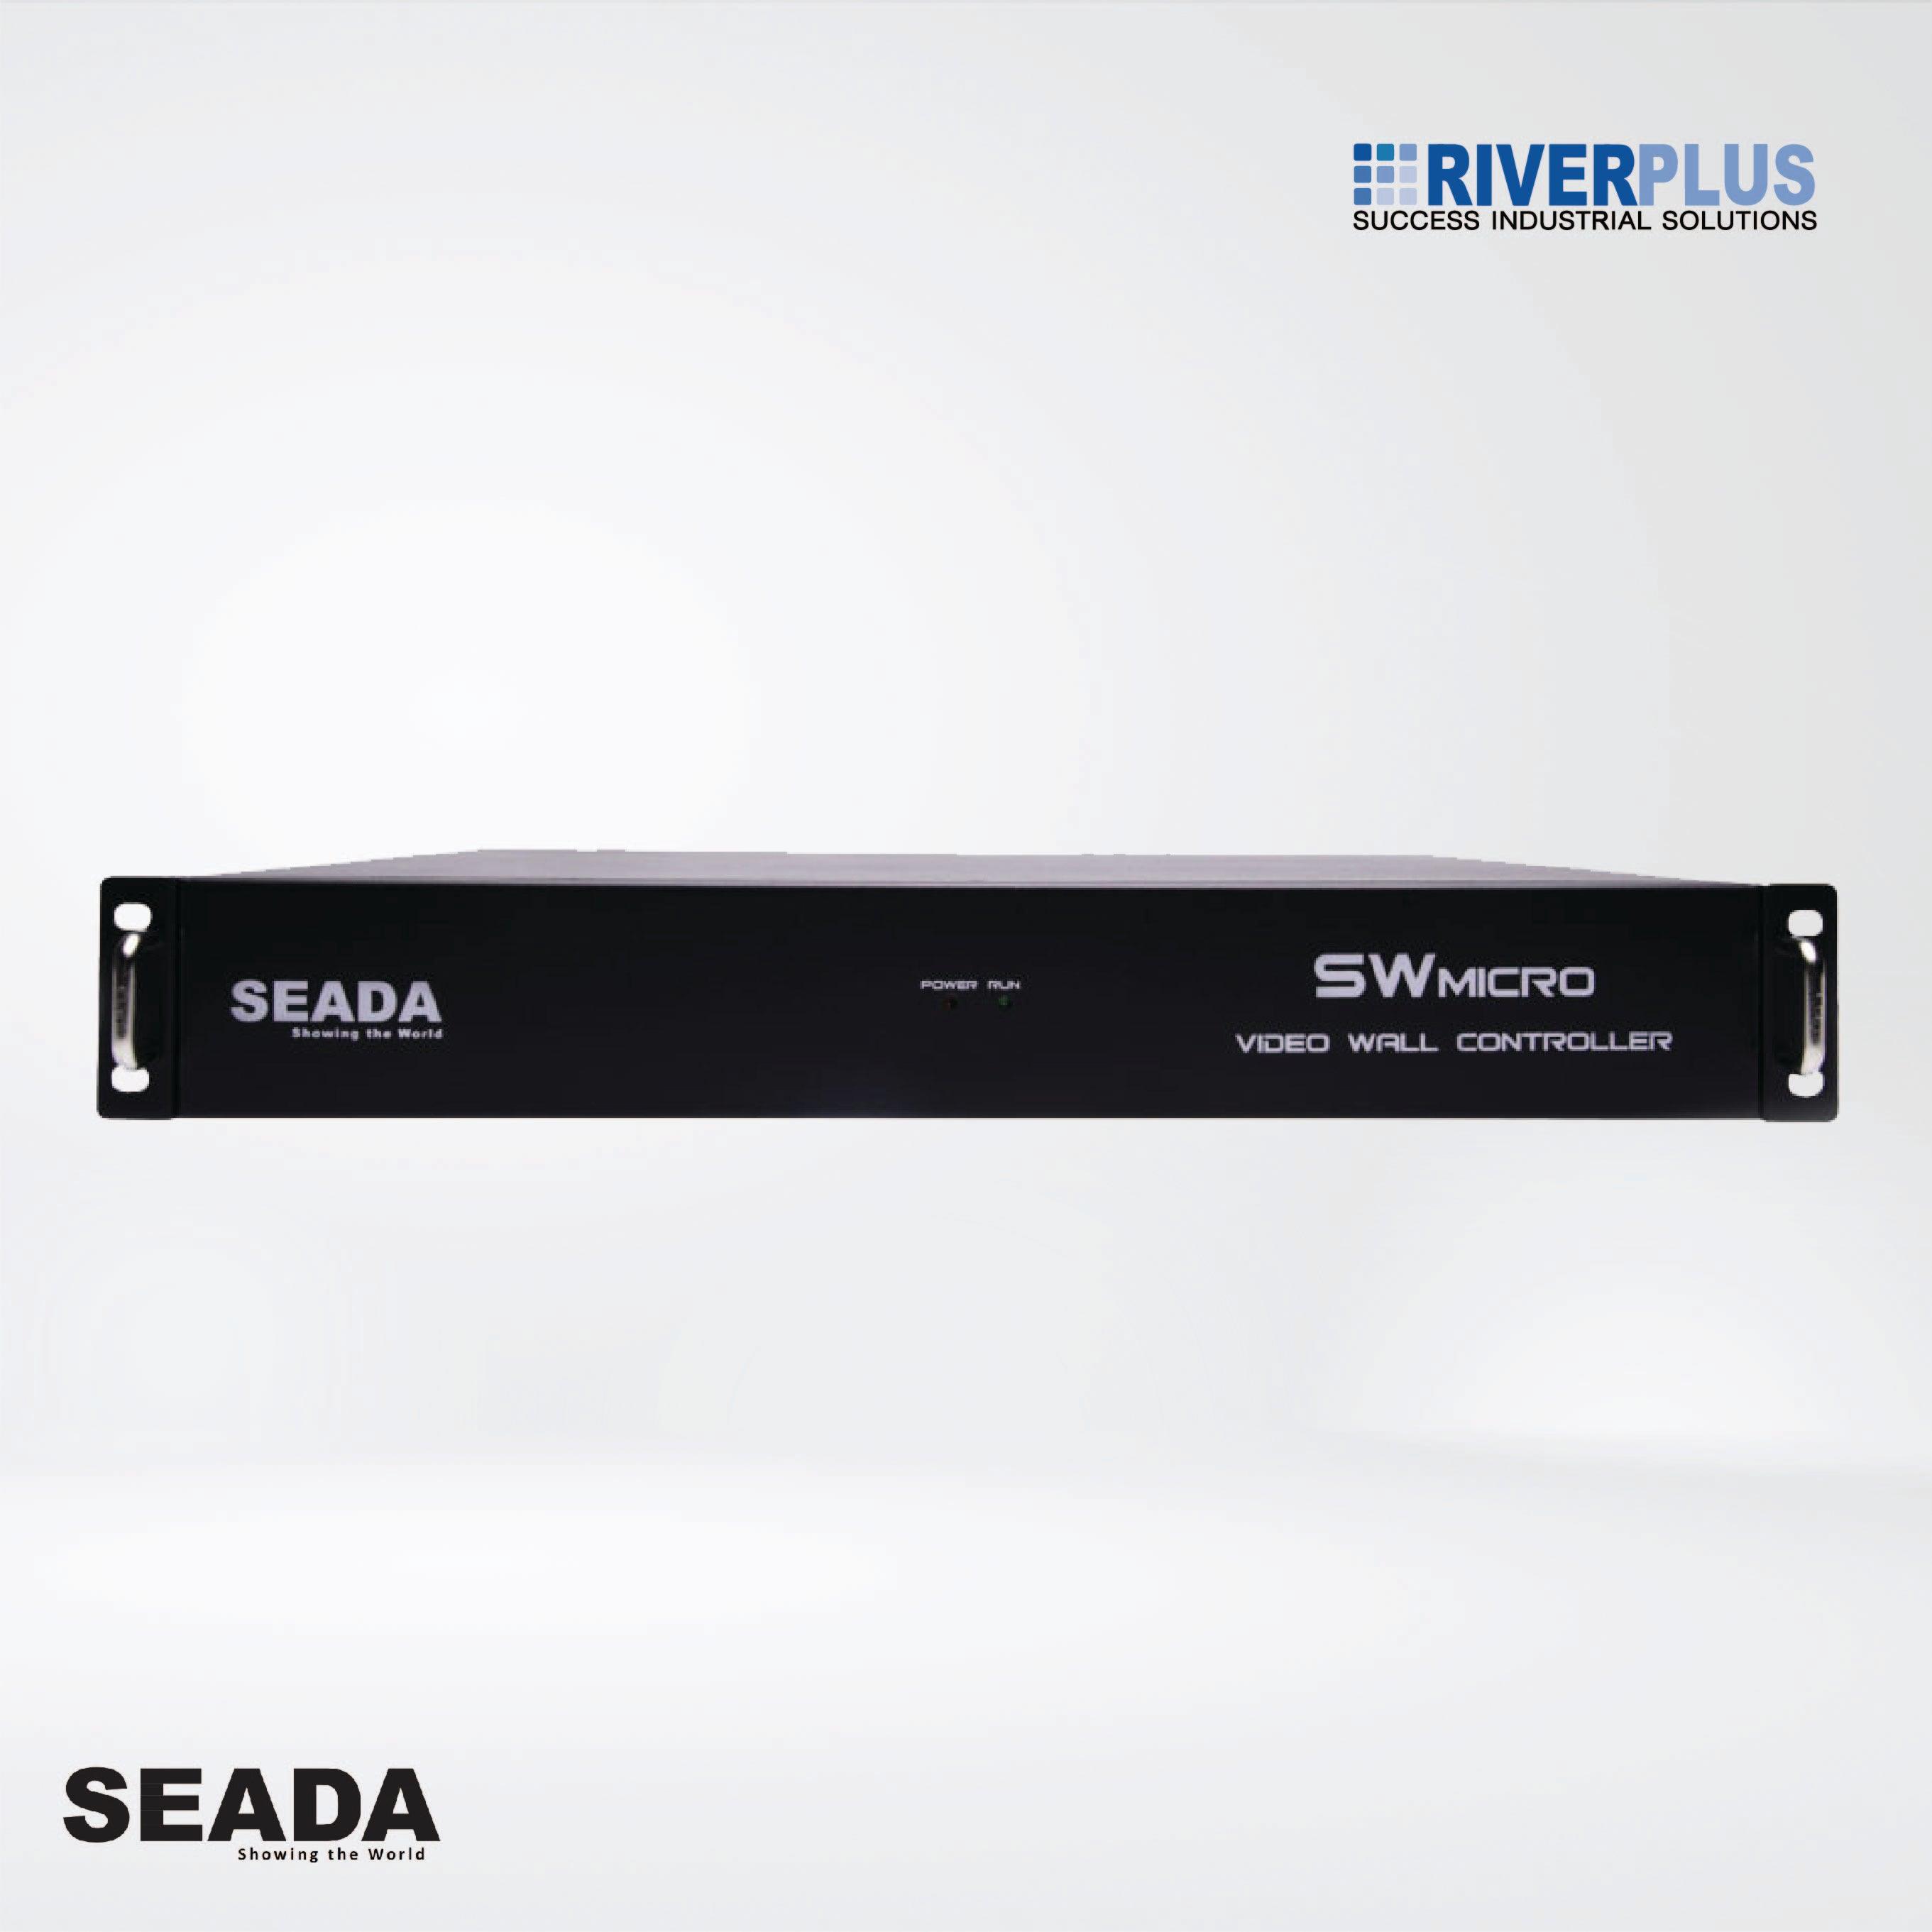 SWMicro16 8 INPUT/16 OUTPUT ,CHASSIS 1.5U ,SolarWall Video Wall Controllers - Riverplus